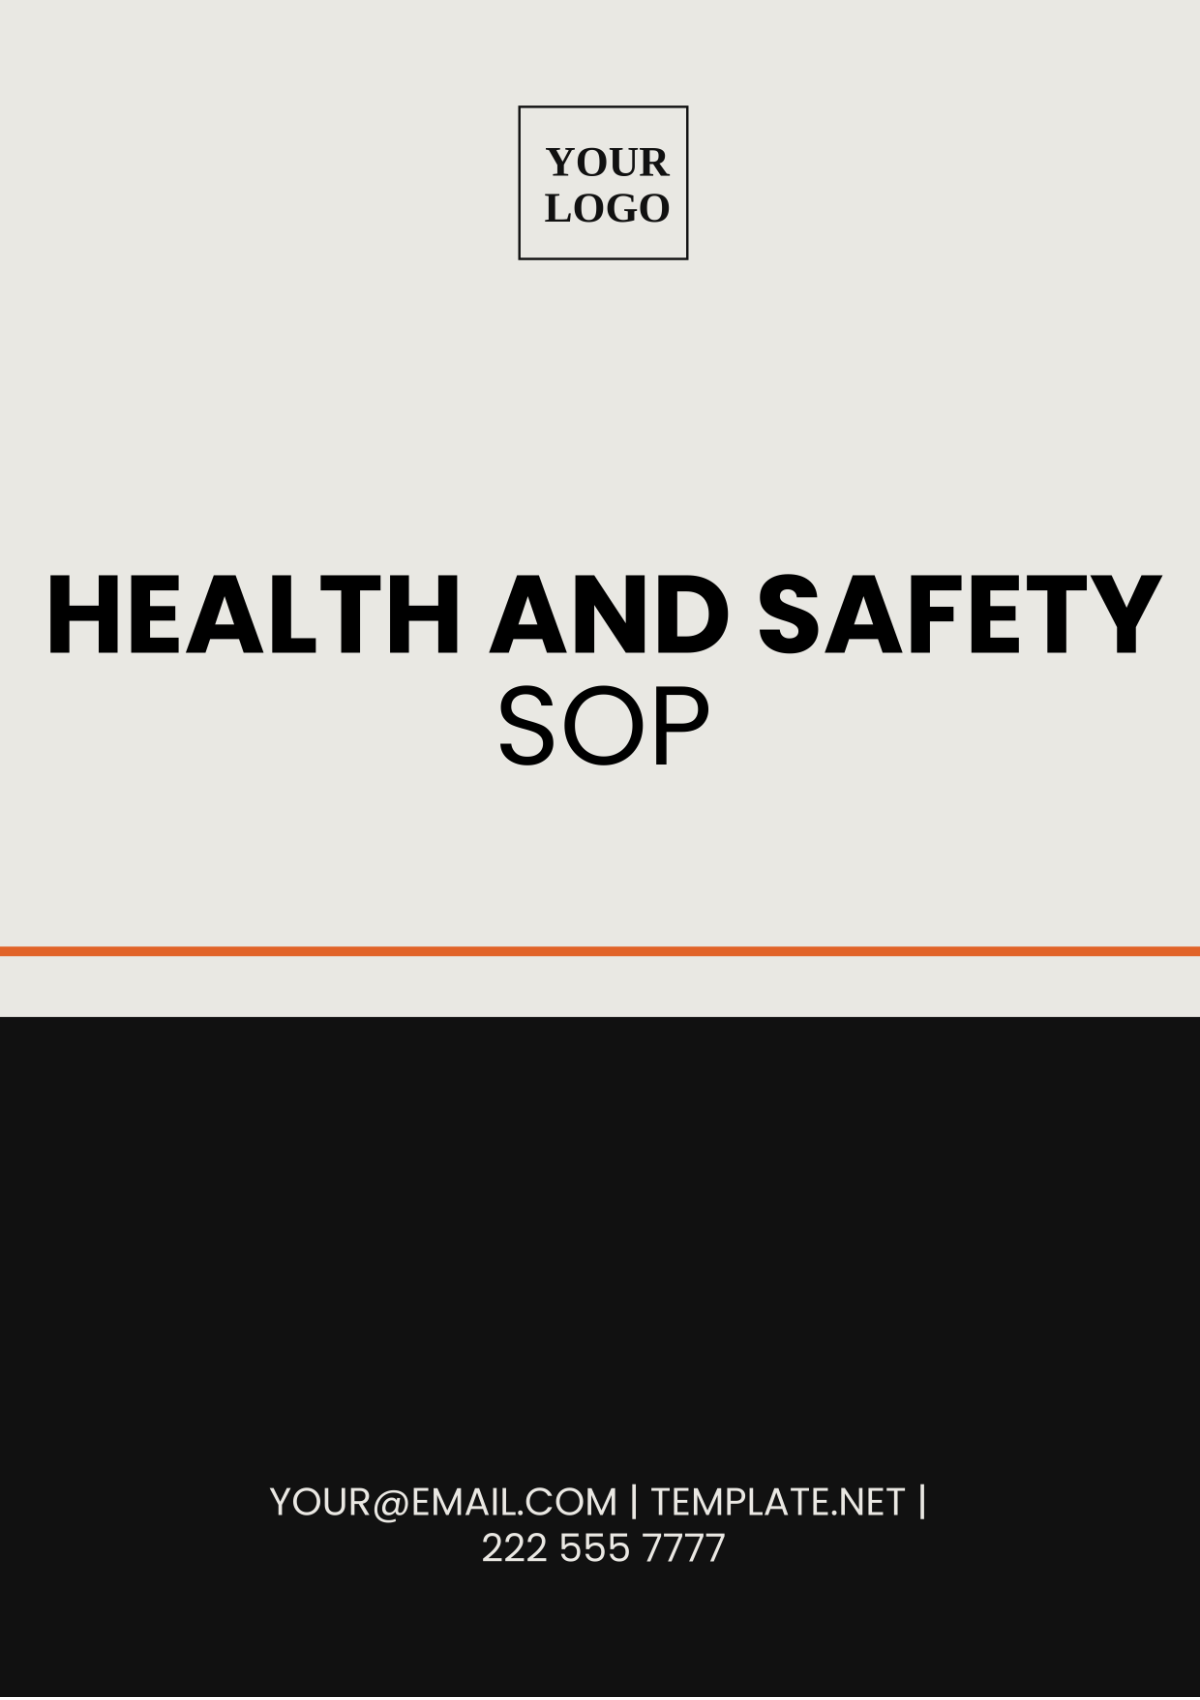 Health and Safety SOP Template